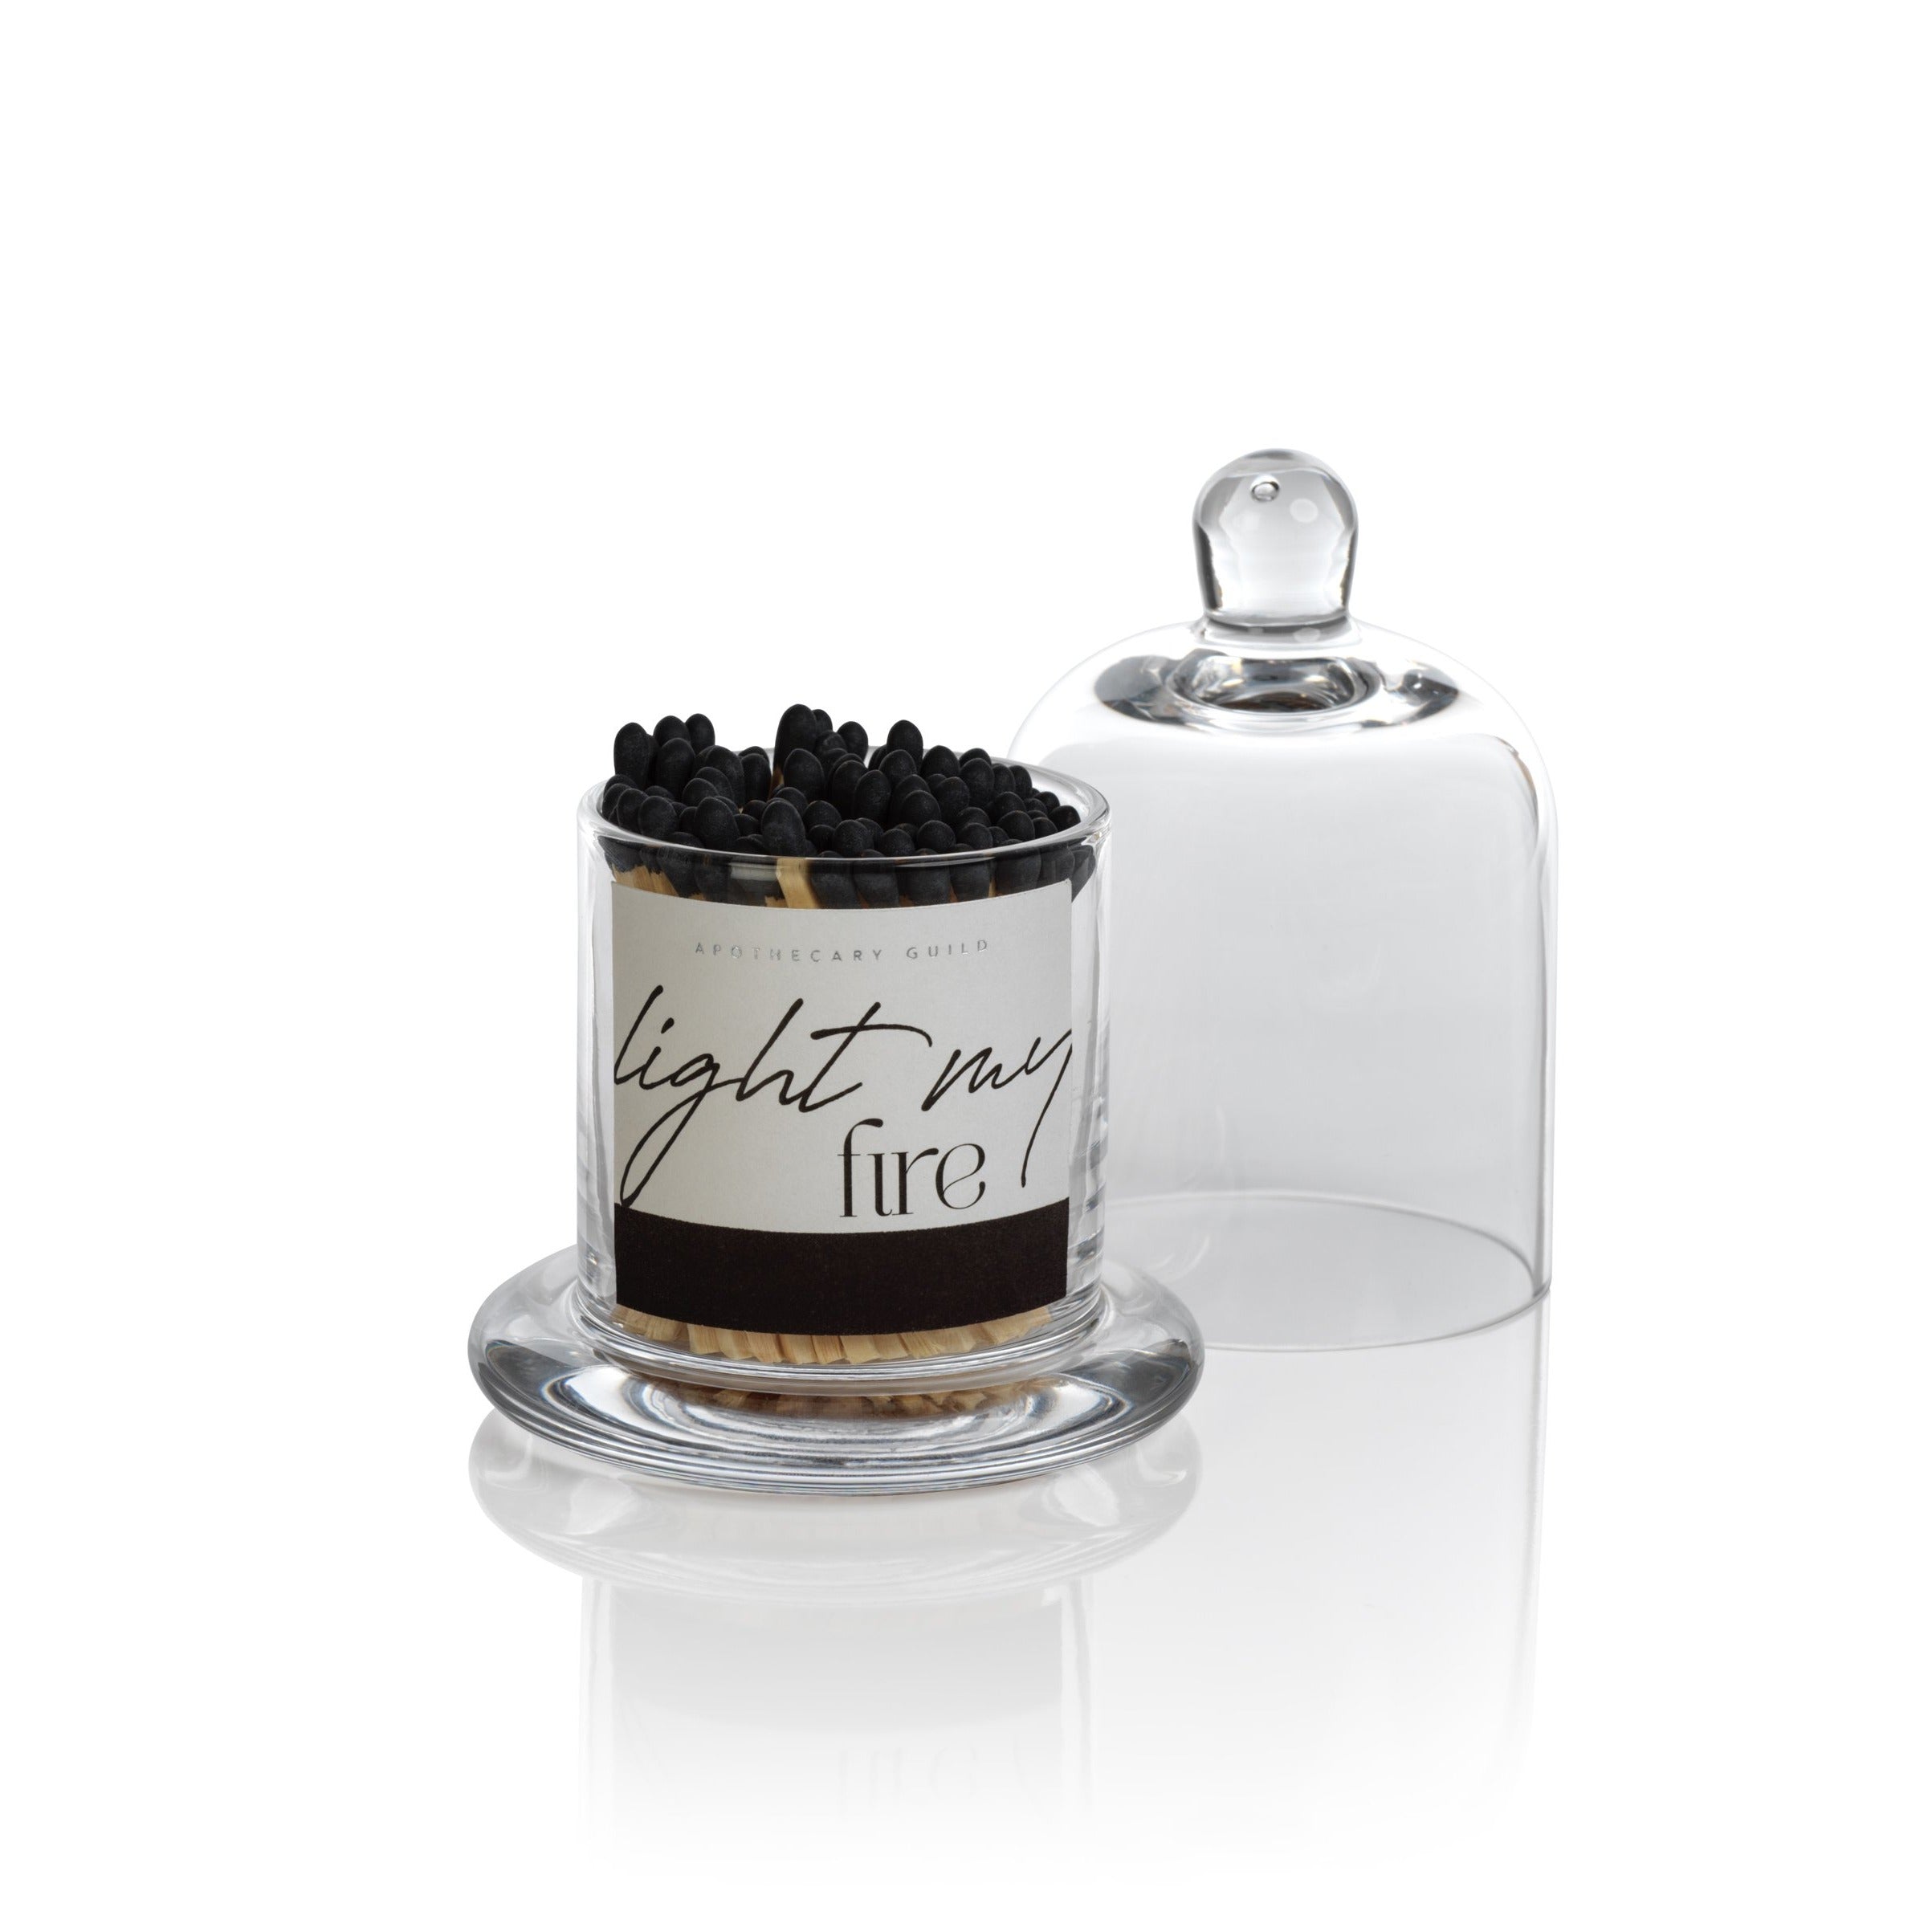 Light My Fire Matches - Apothecary Jar - CARLYLE AVENUE